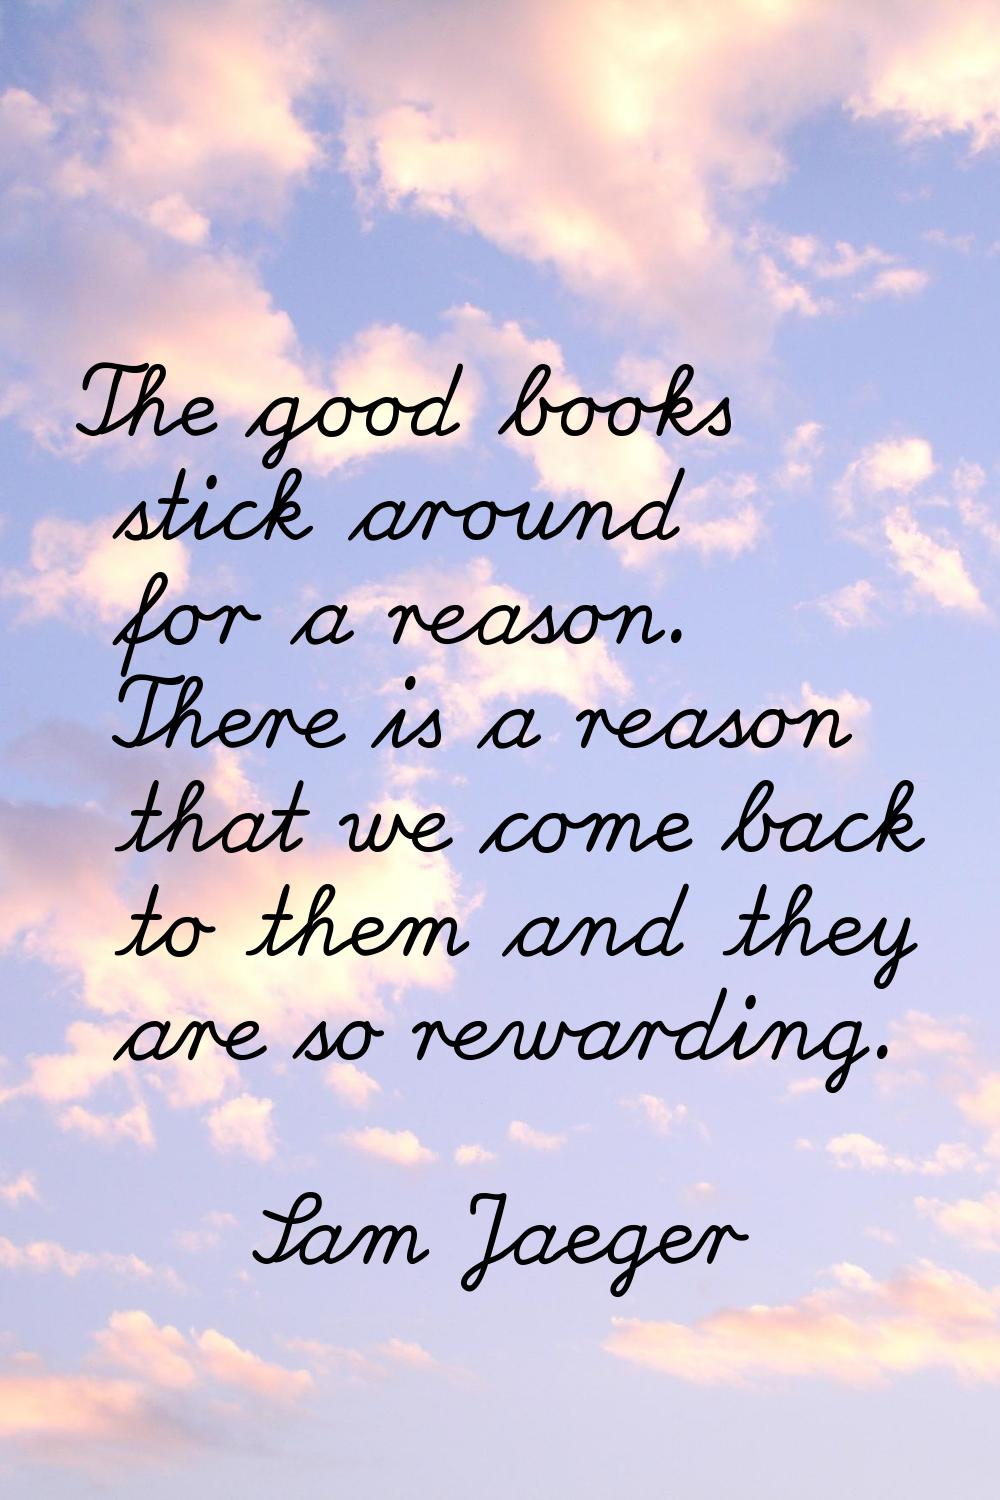 The good books stick around for a reason. There is a reason that we come back to them and they are 